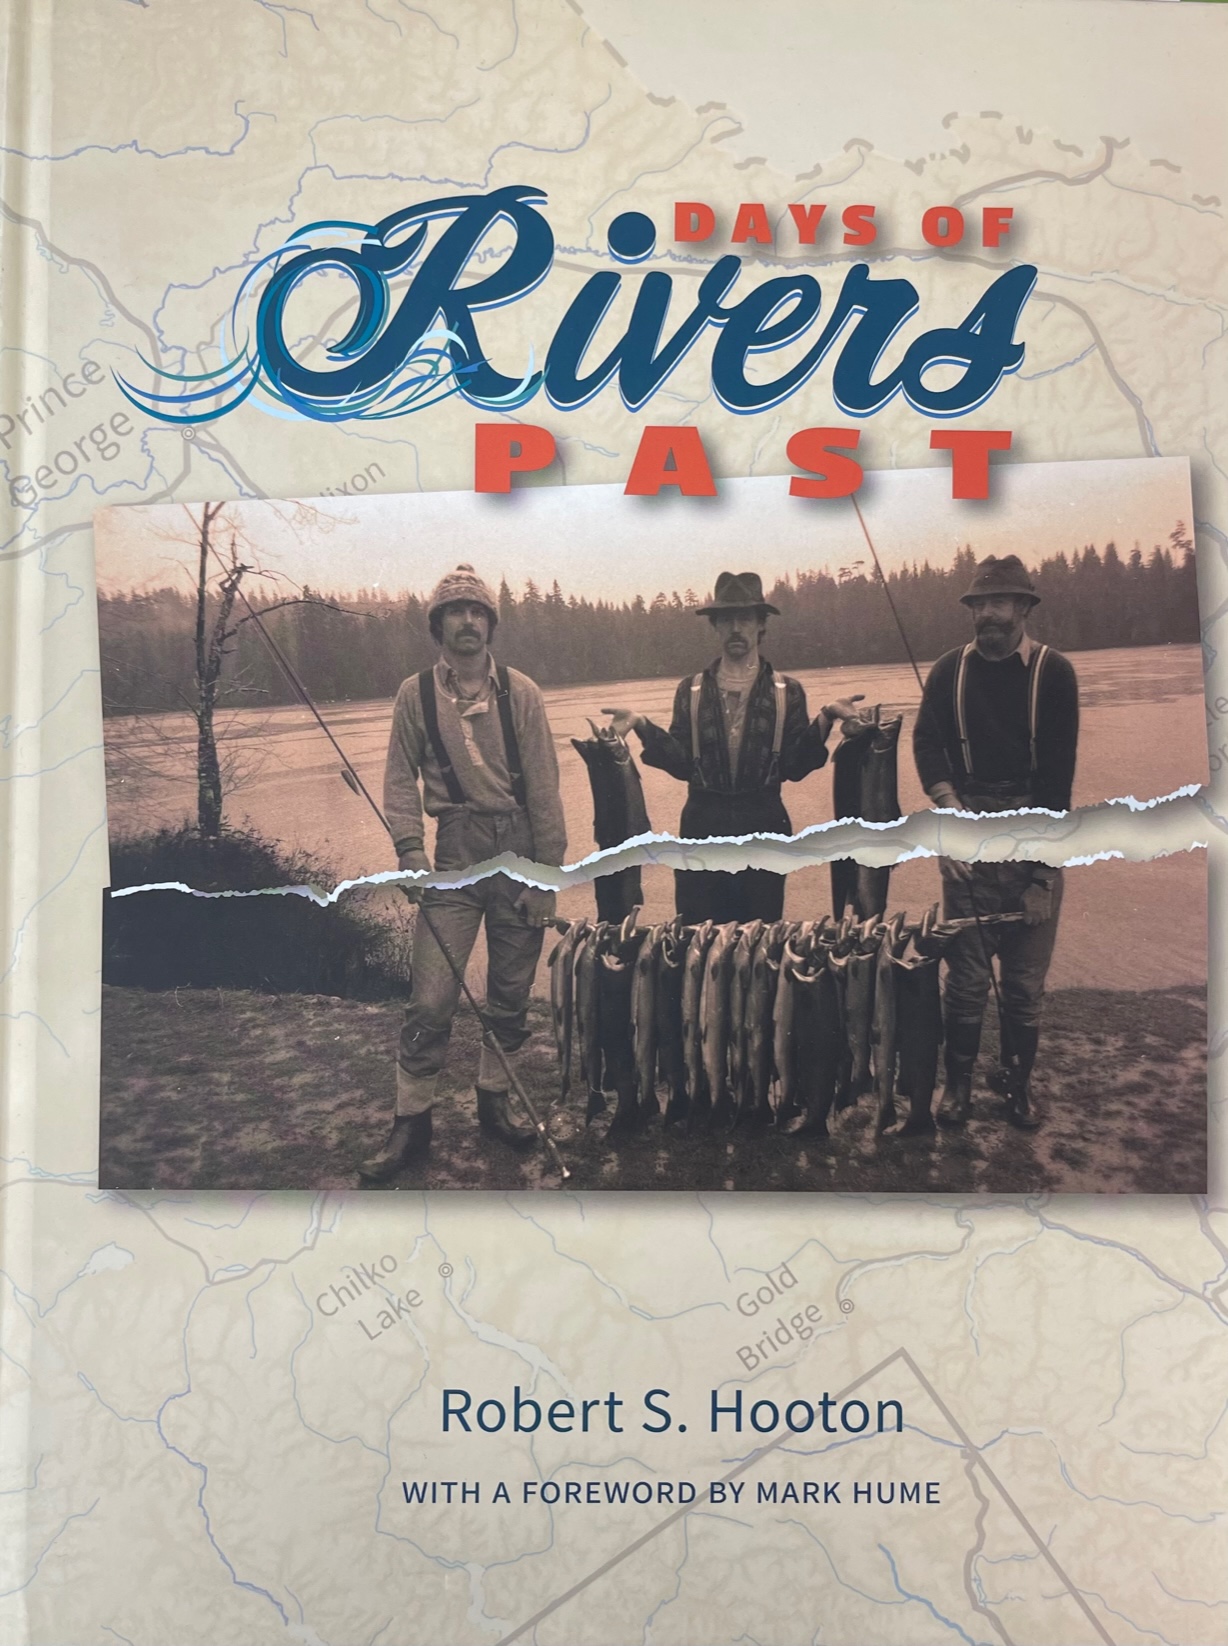 Days Of Rivers Past - by Robert S. Hooton (Hard Cover)